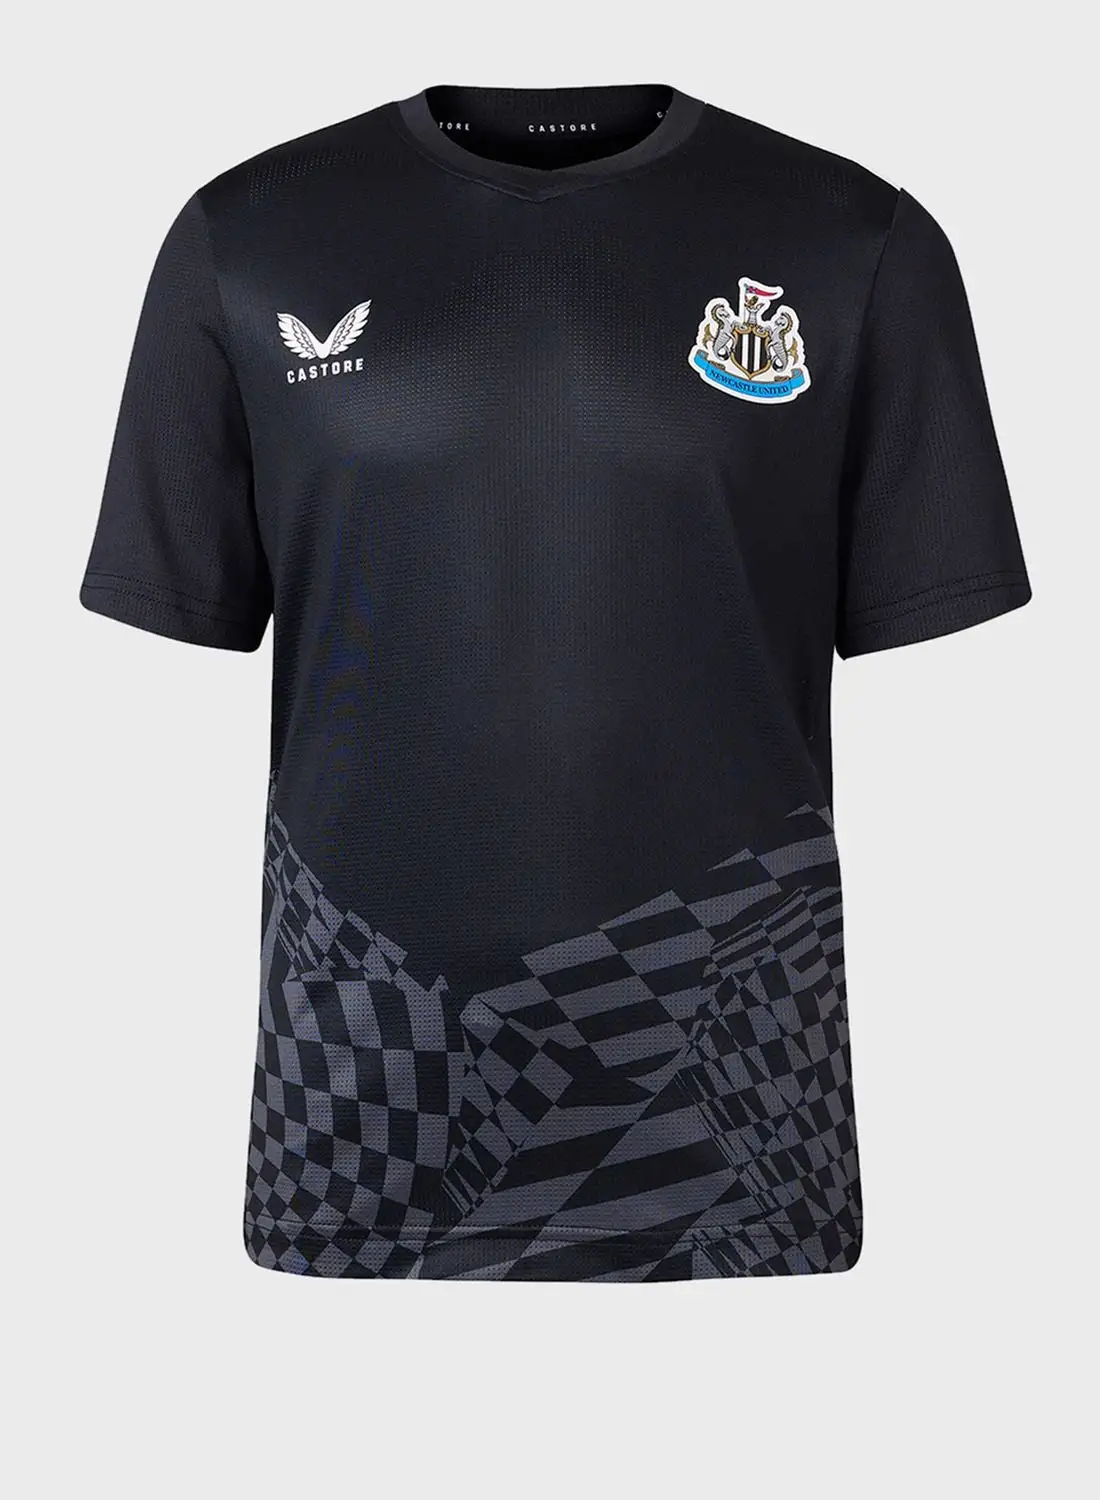 CASTORE Newcastle United Home Matchday T-Shirt